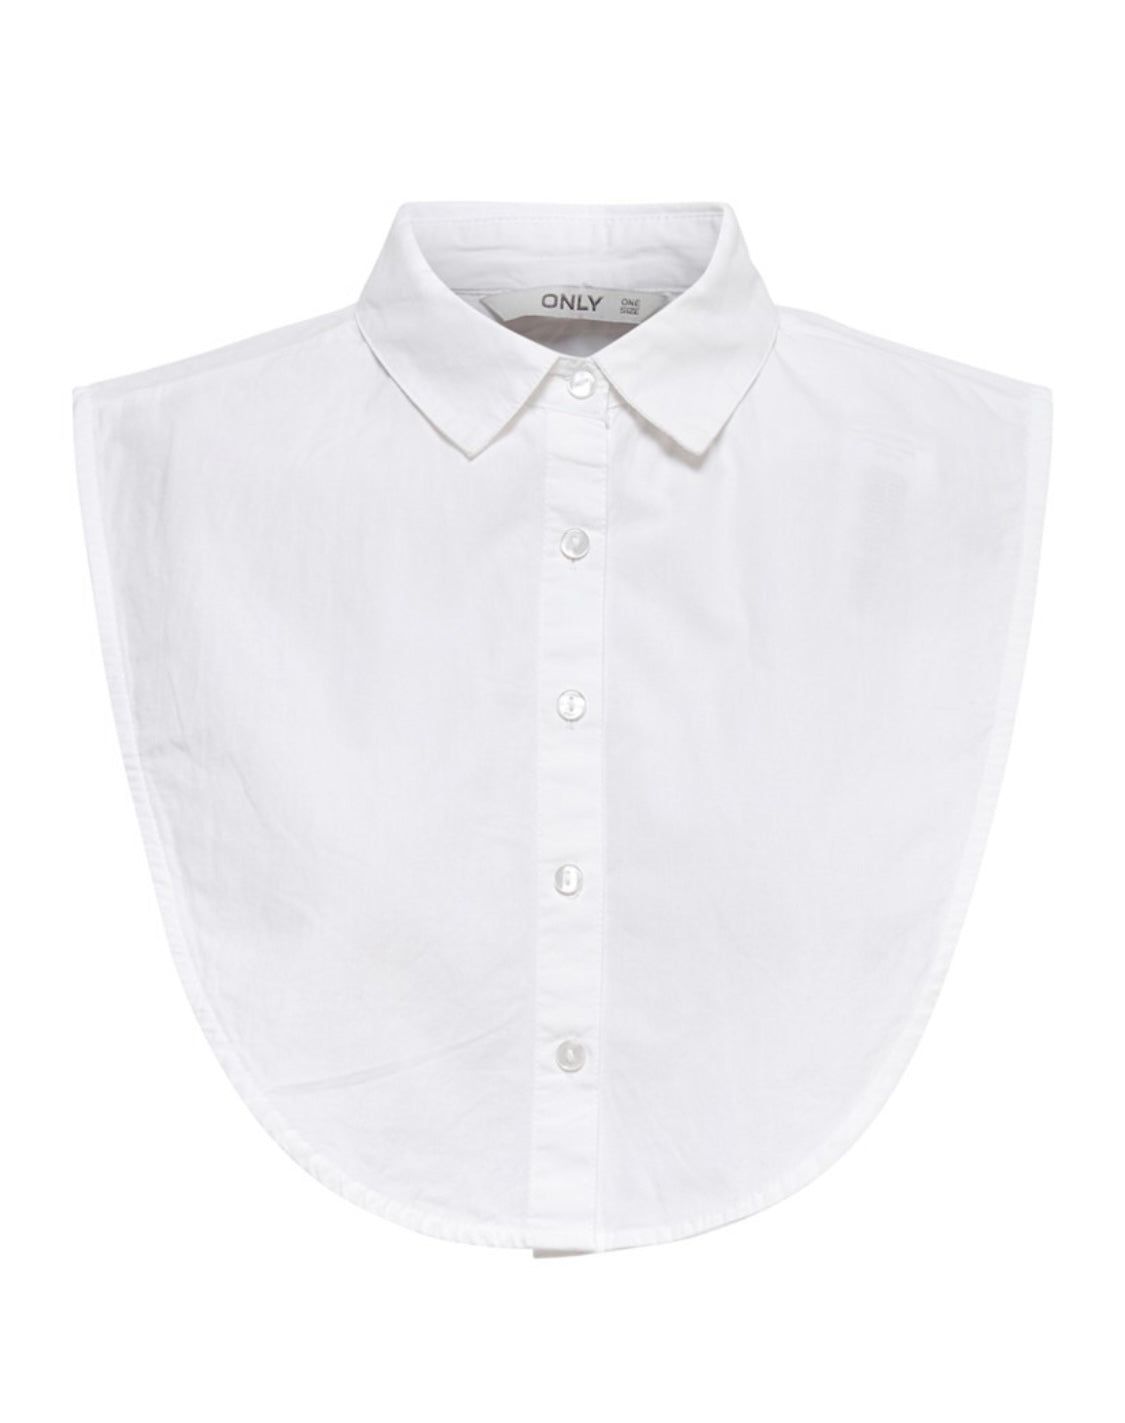 ONLY - SHELLY LIFE WEAVED COLLAR - WHITE